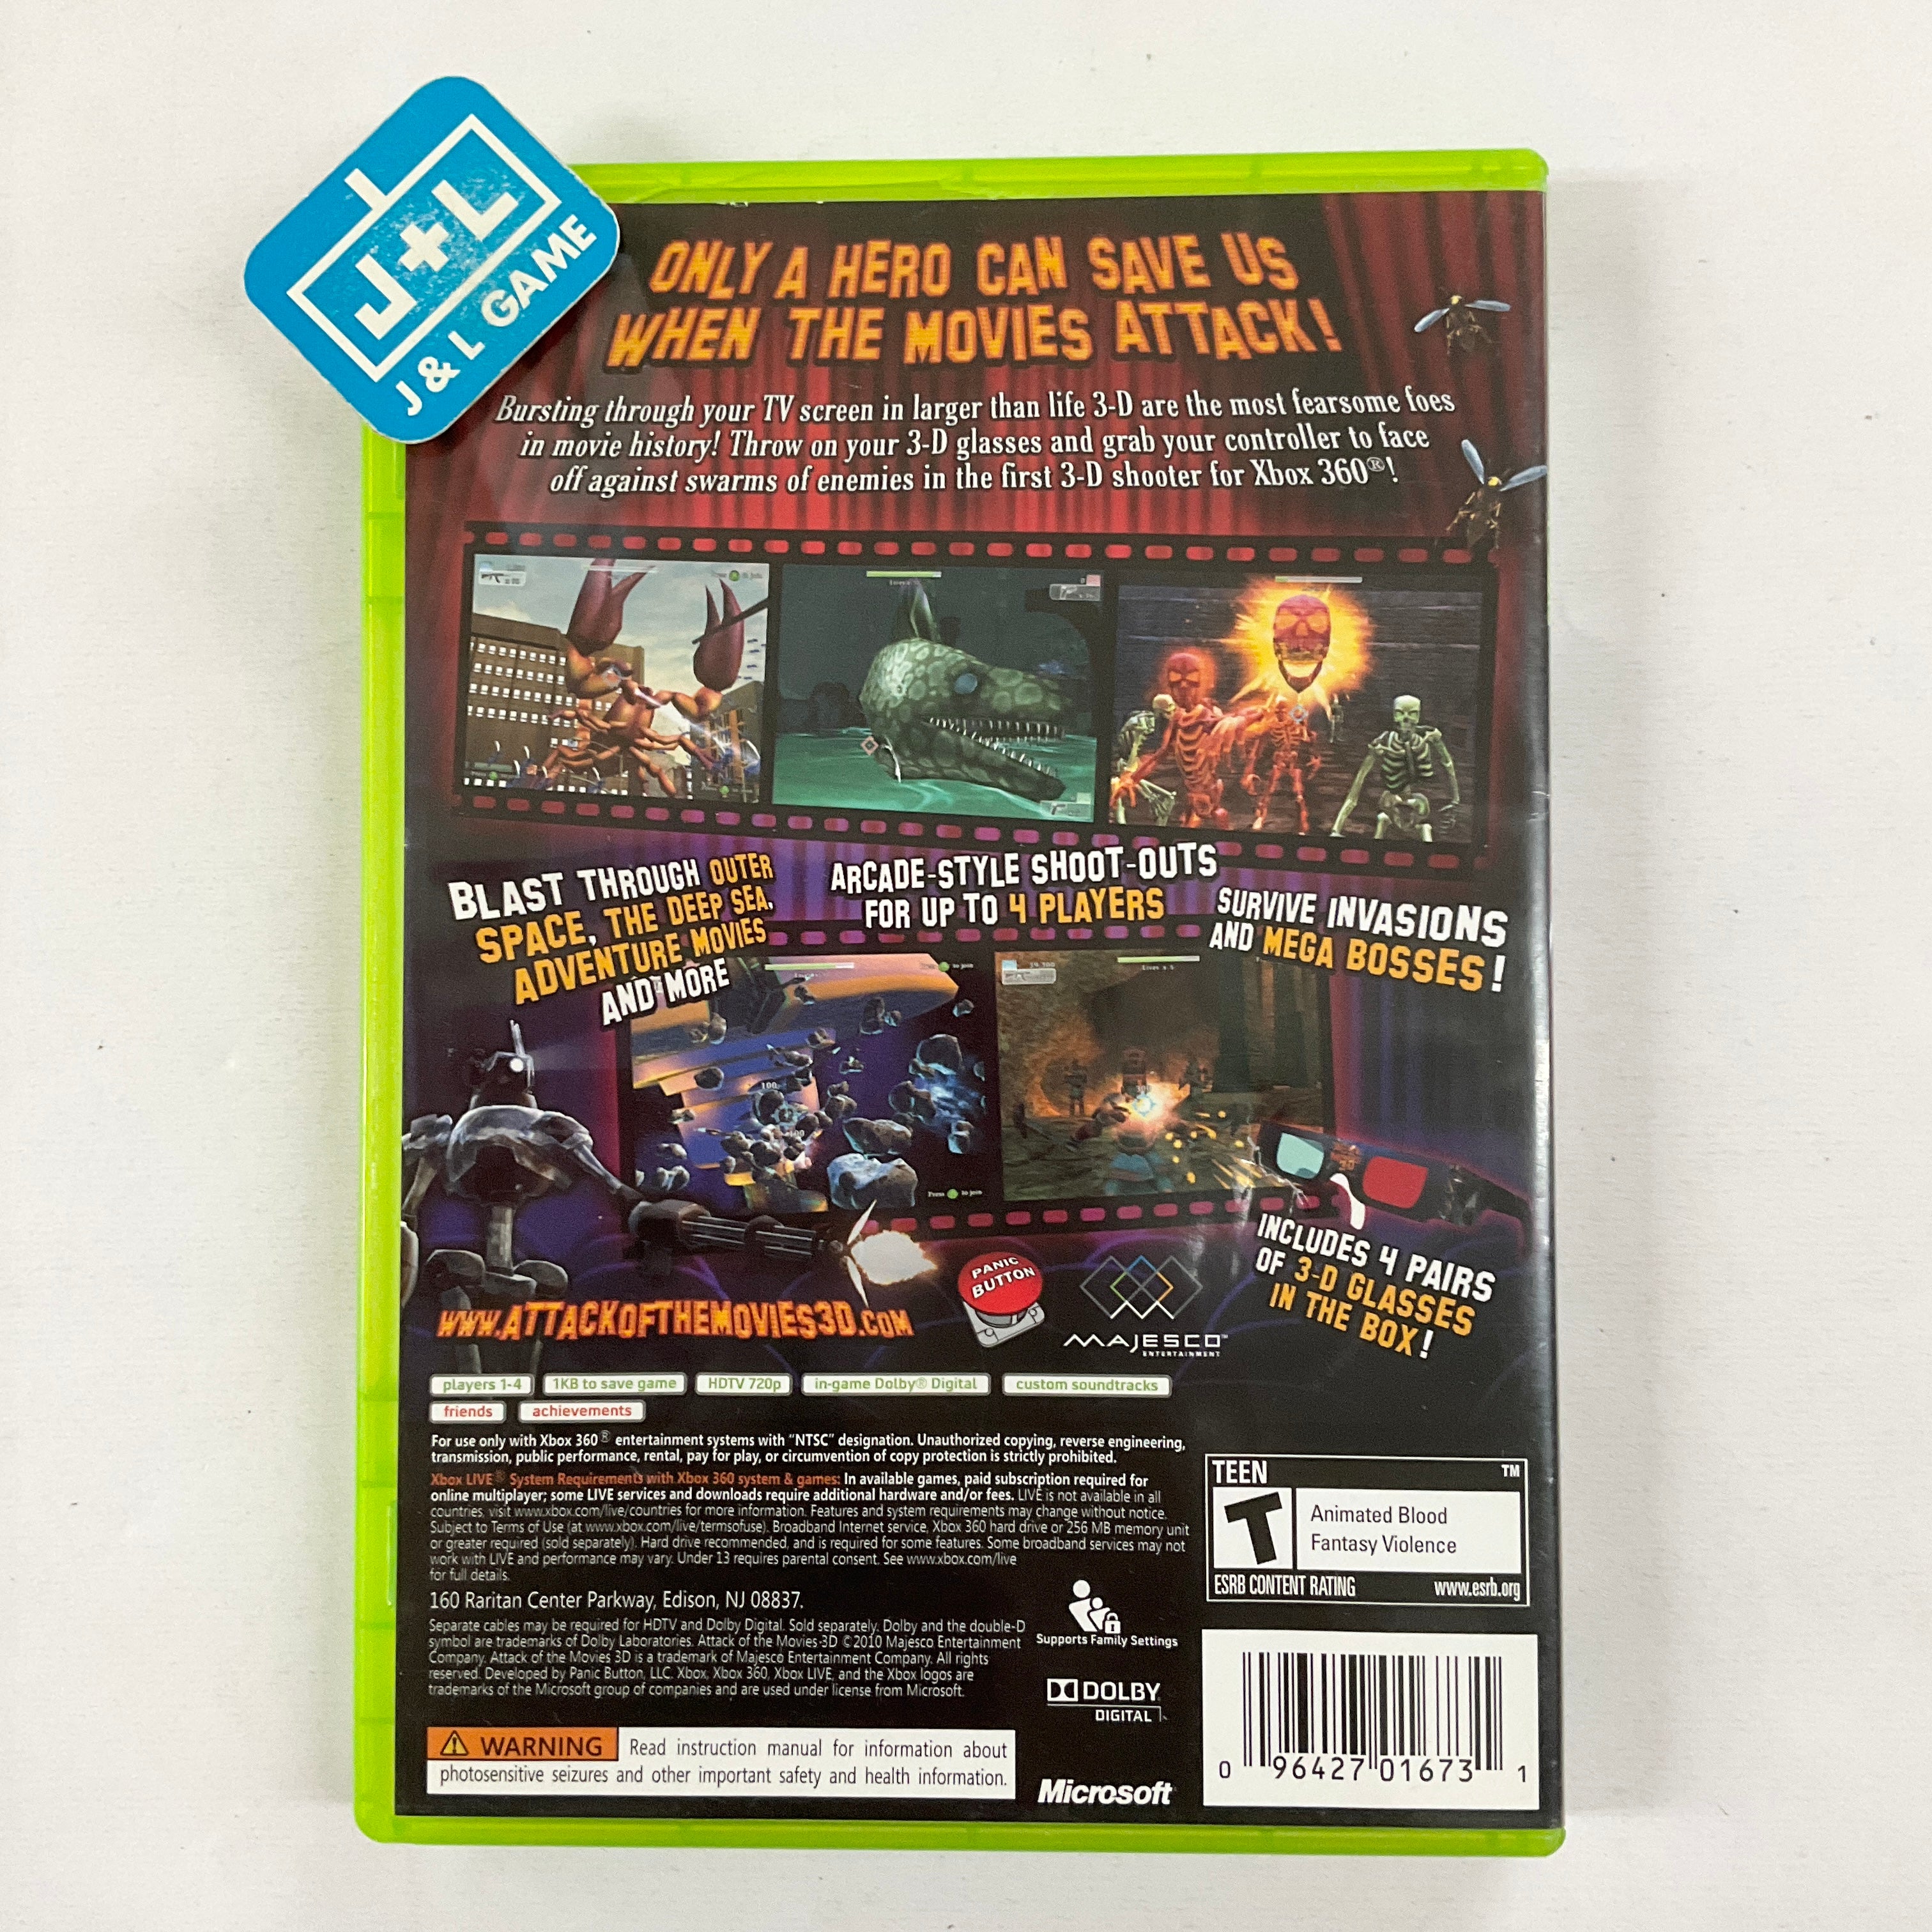 Attack of the Movies 3D - Xbox 360 [Pre-Owned]